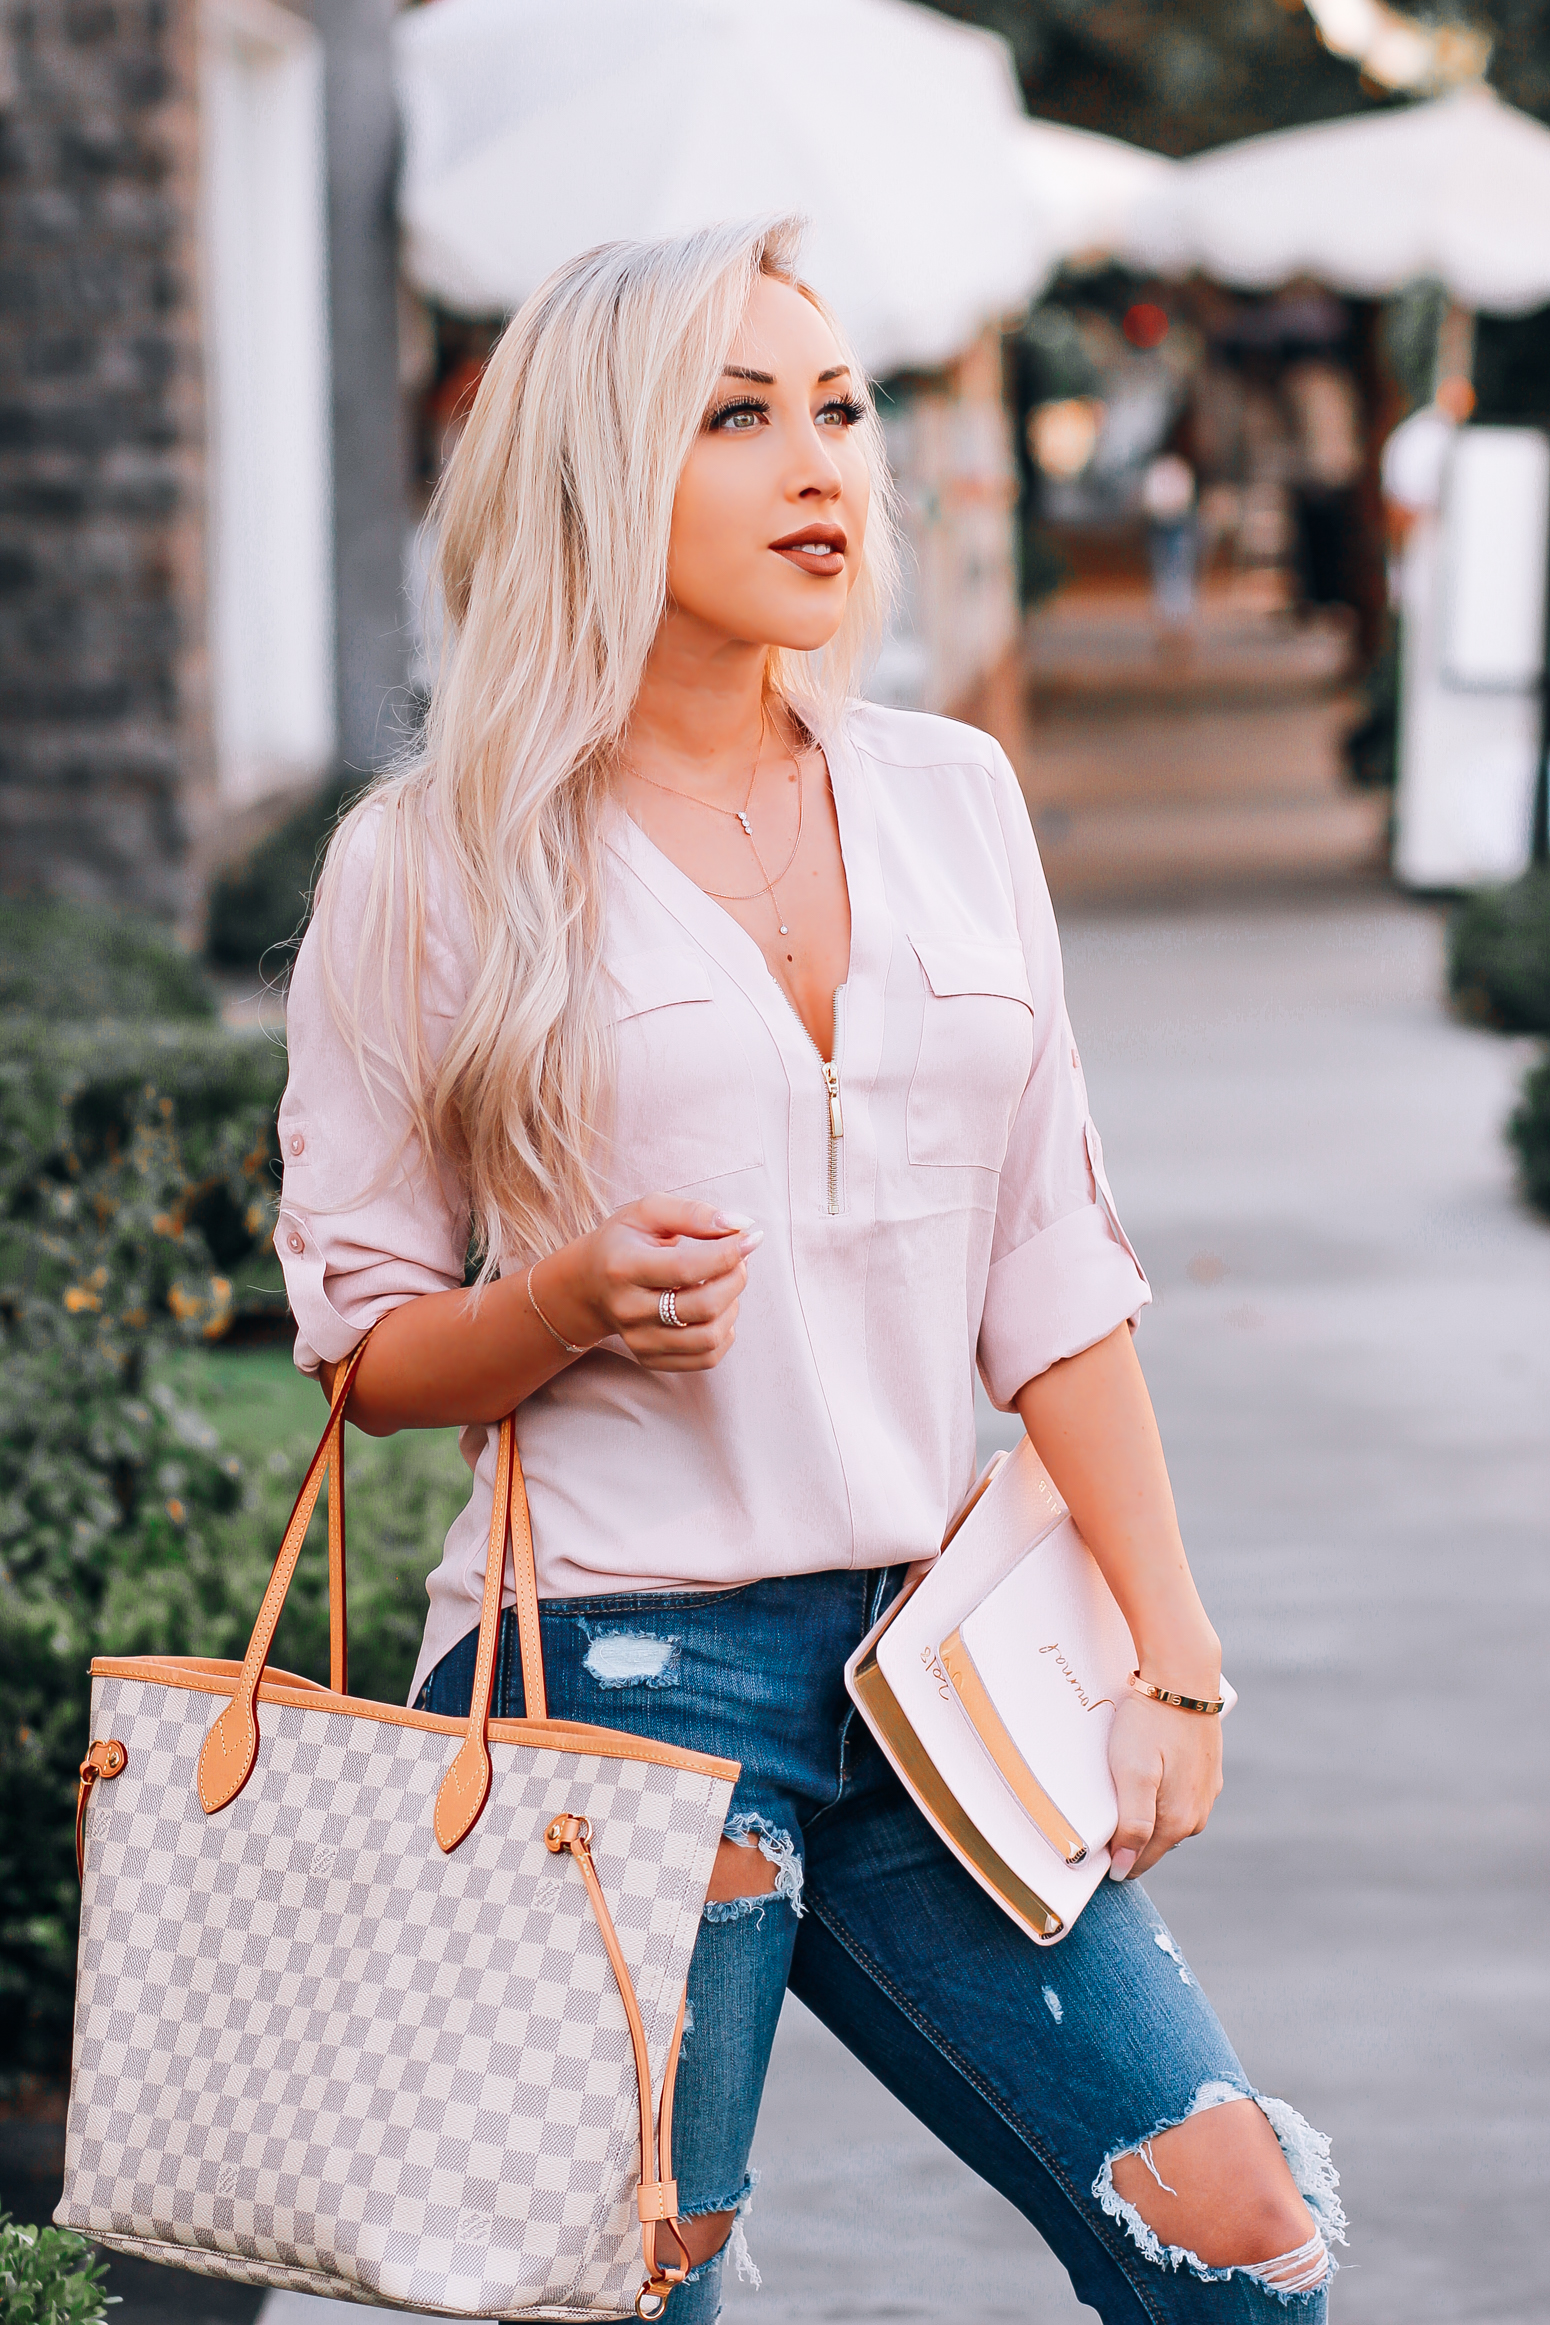 Blondie in the City | Casual Style | The Prettiest Pink Journal & 2018 Agenda